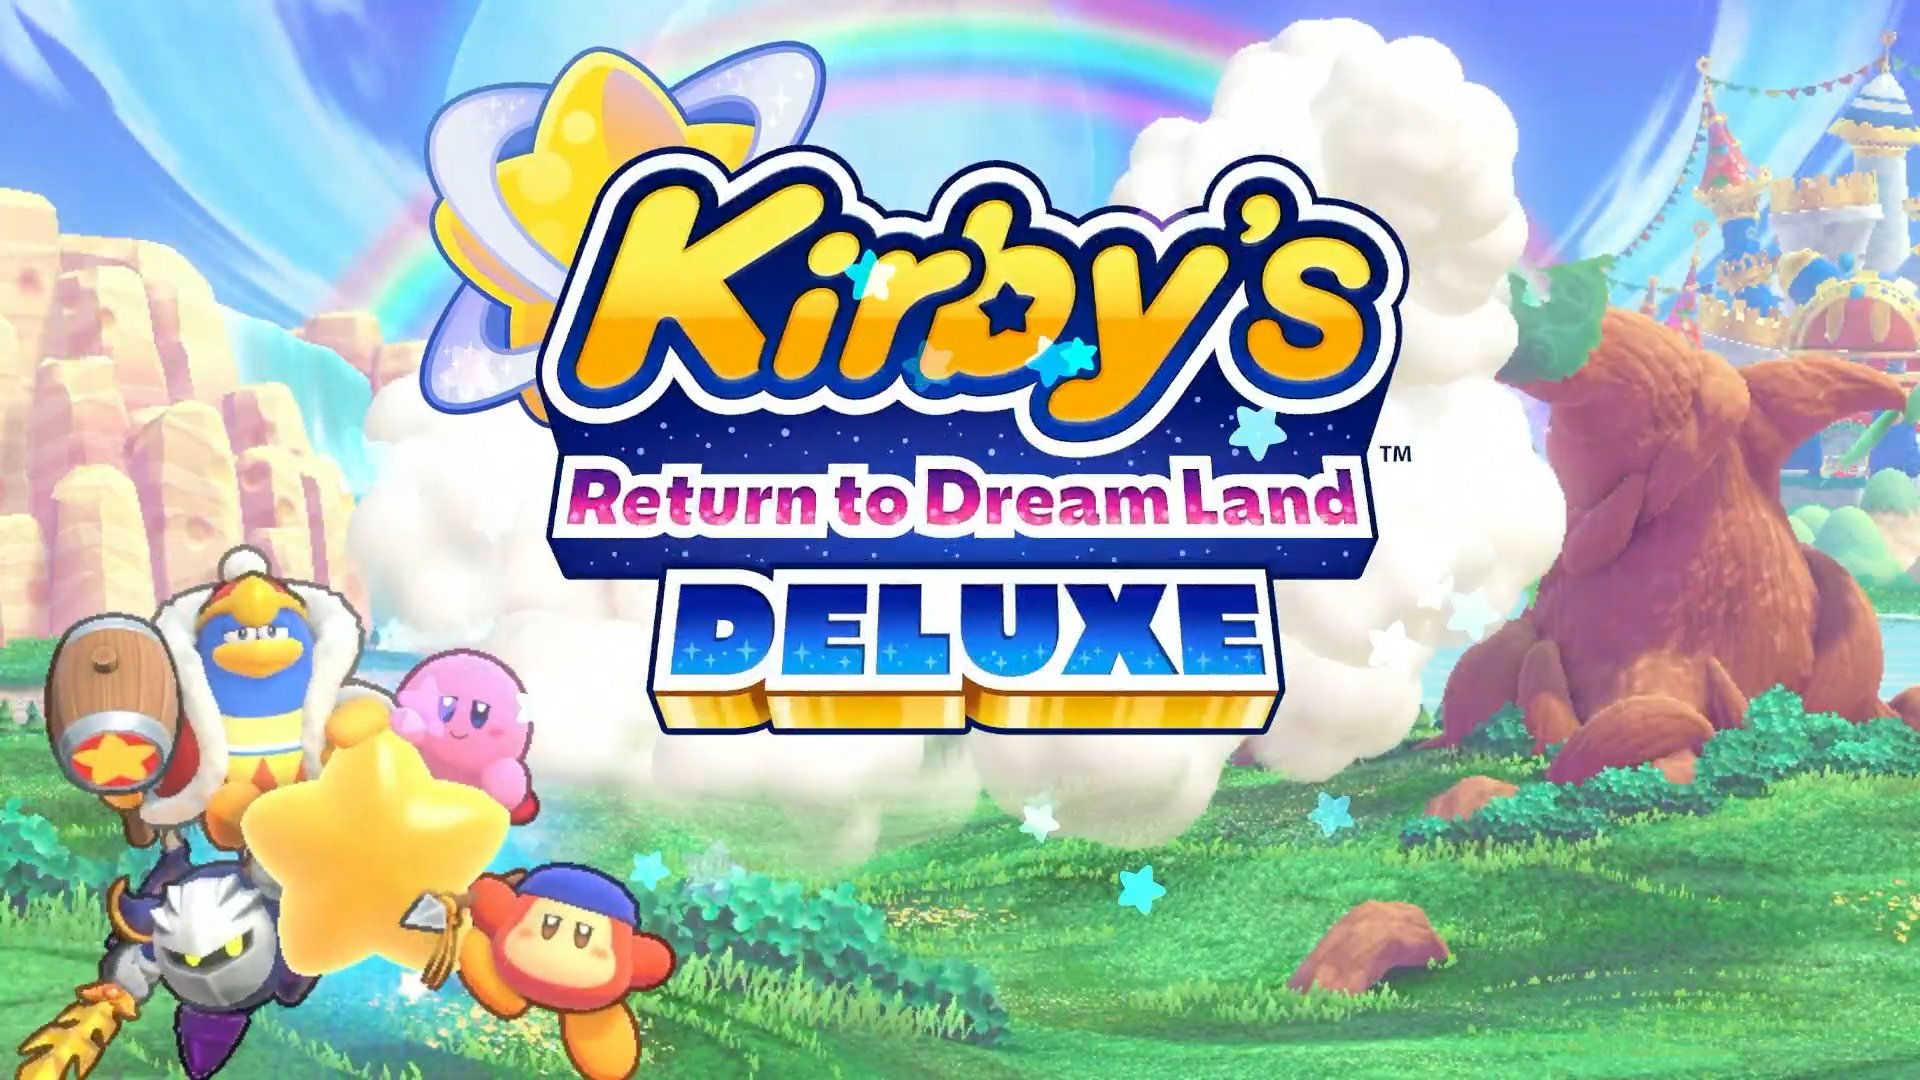 Kirby Returns to Dream Land again in new Deluxe version